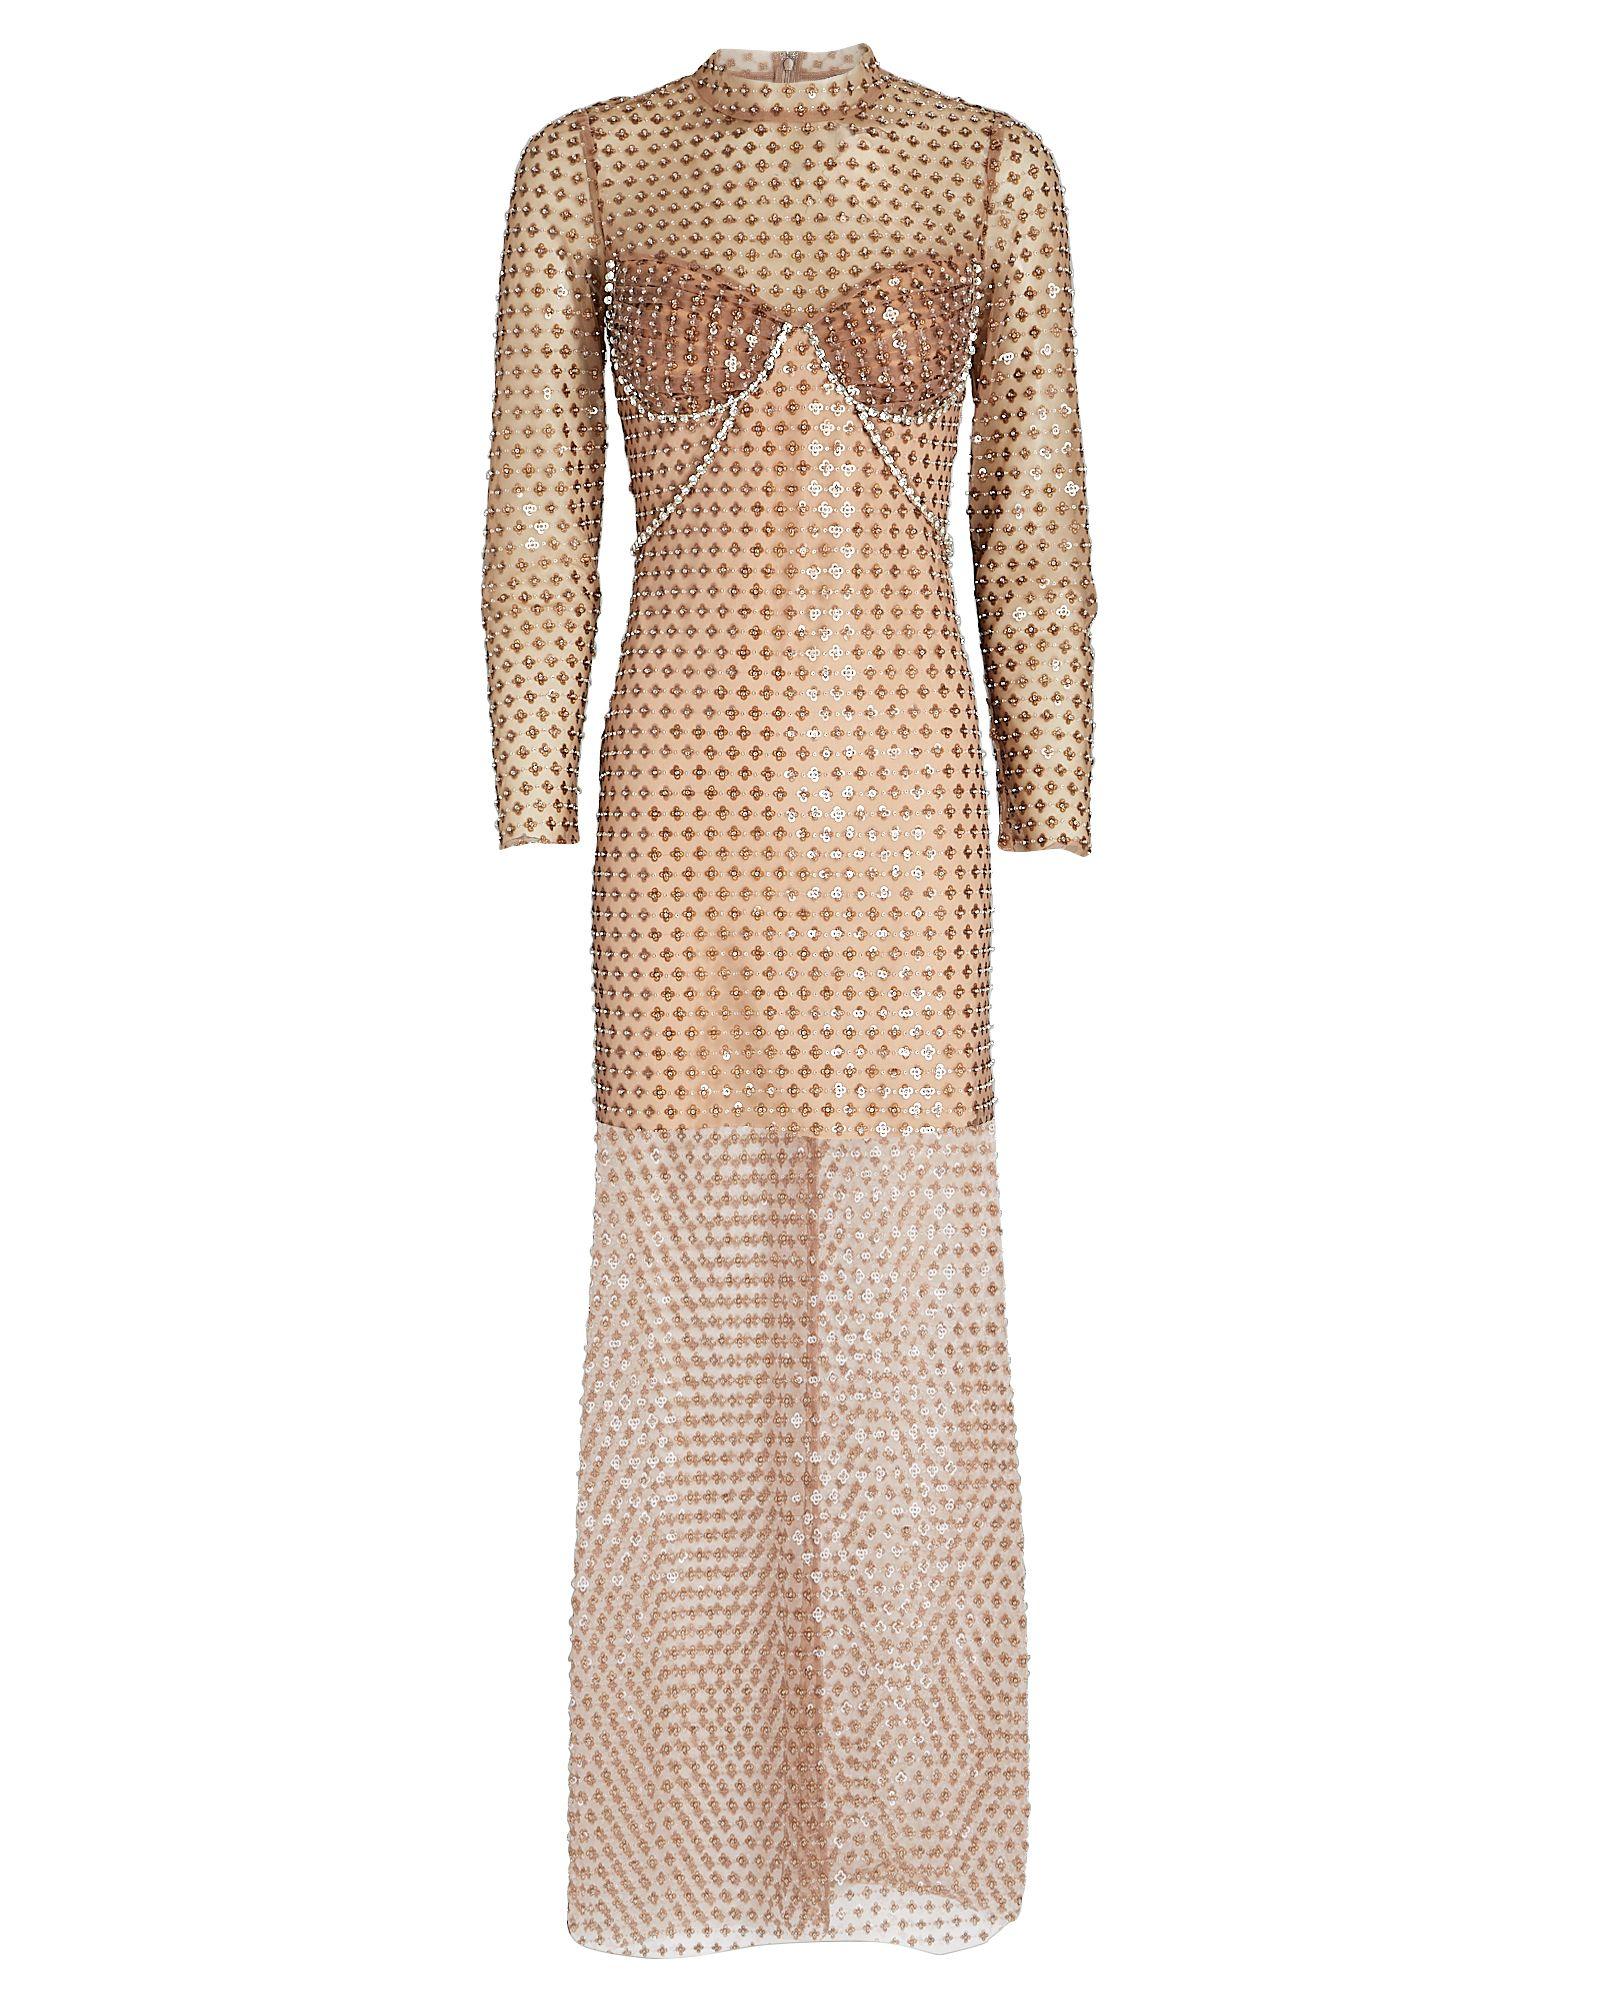 Self-Portrait Dot Sequined Mesh Maxi Dress in Natural | Lyst